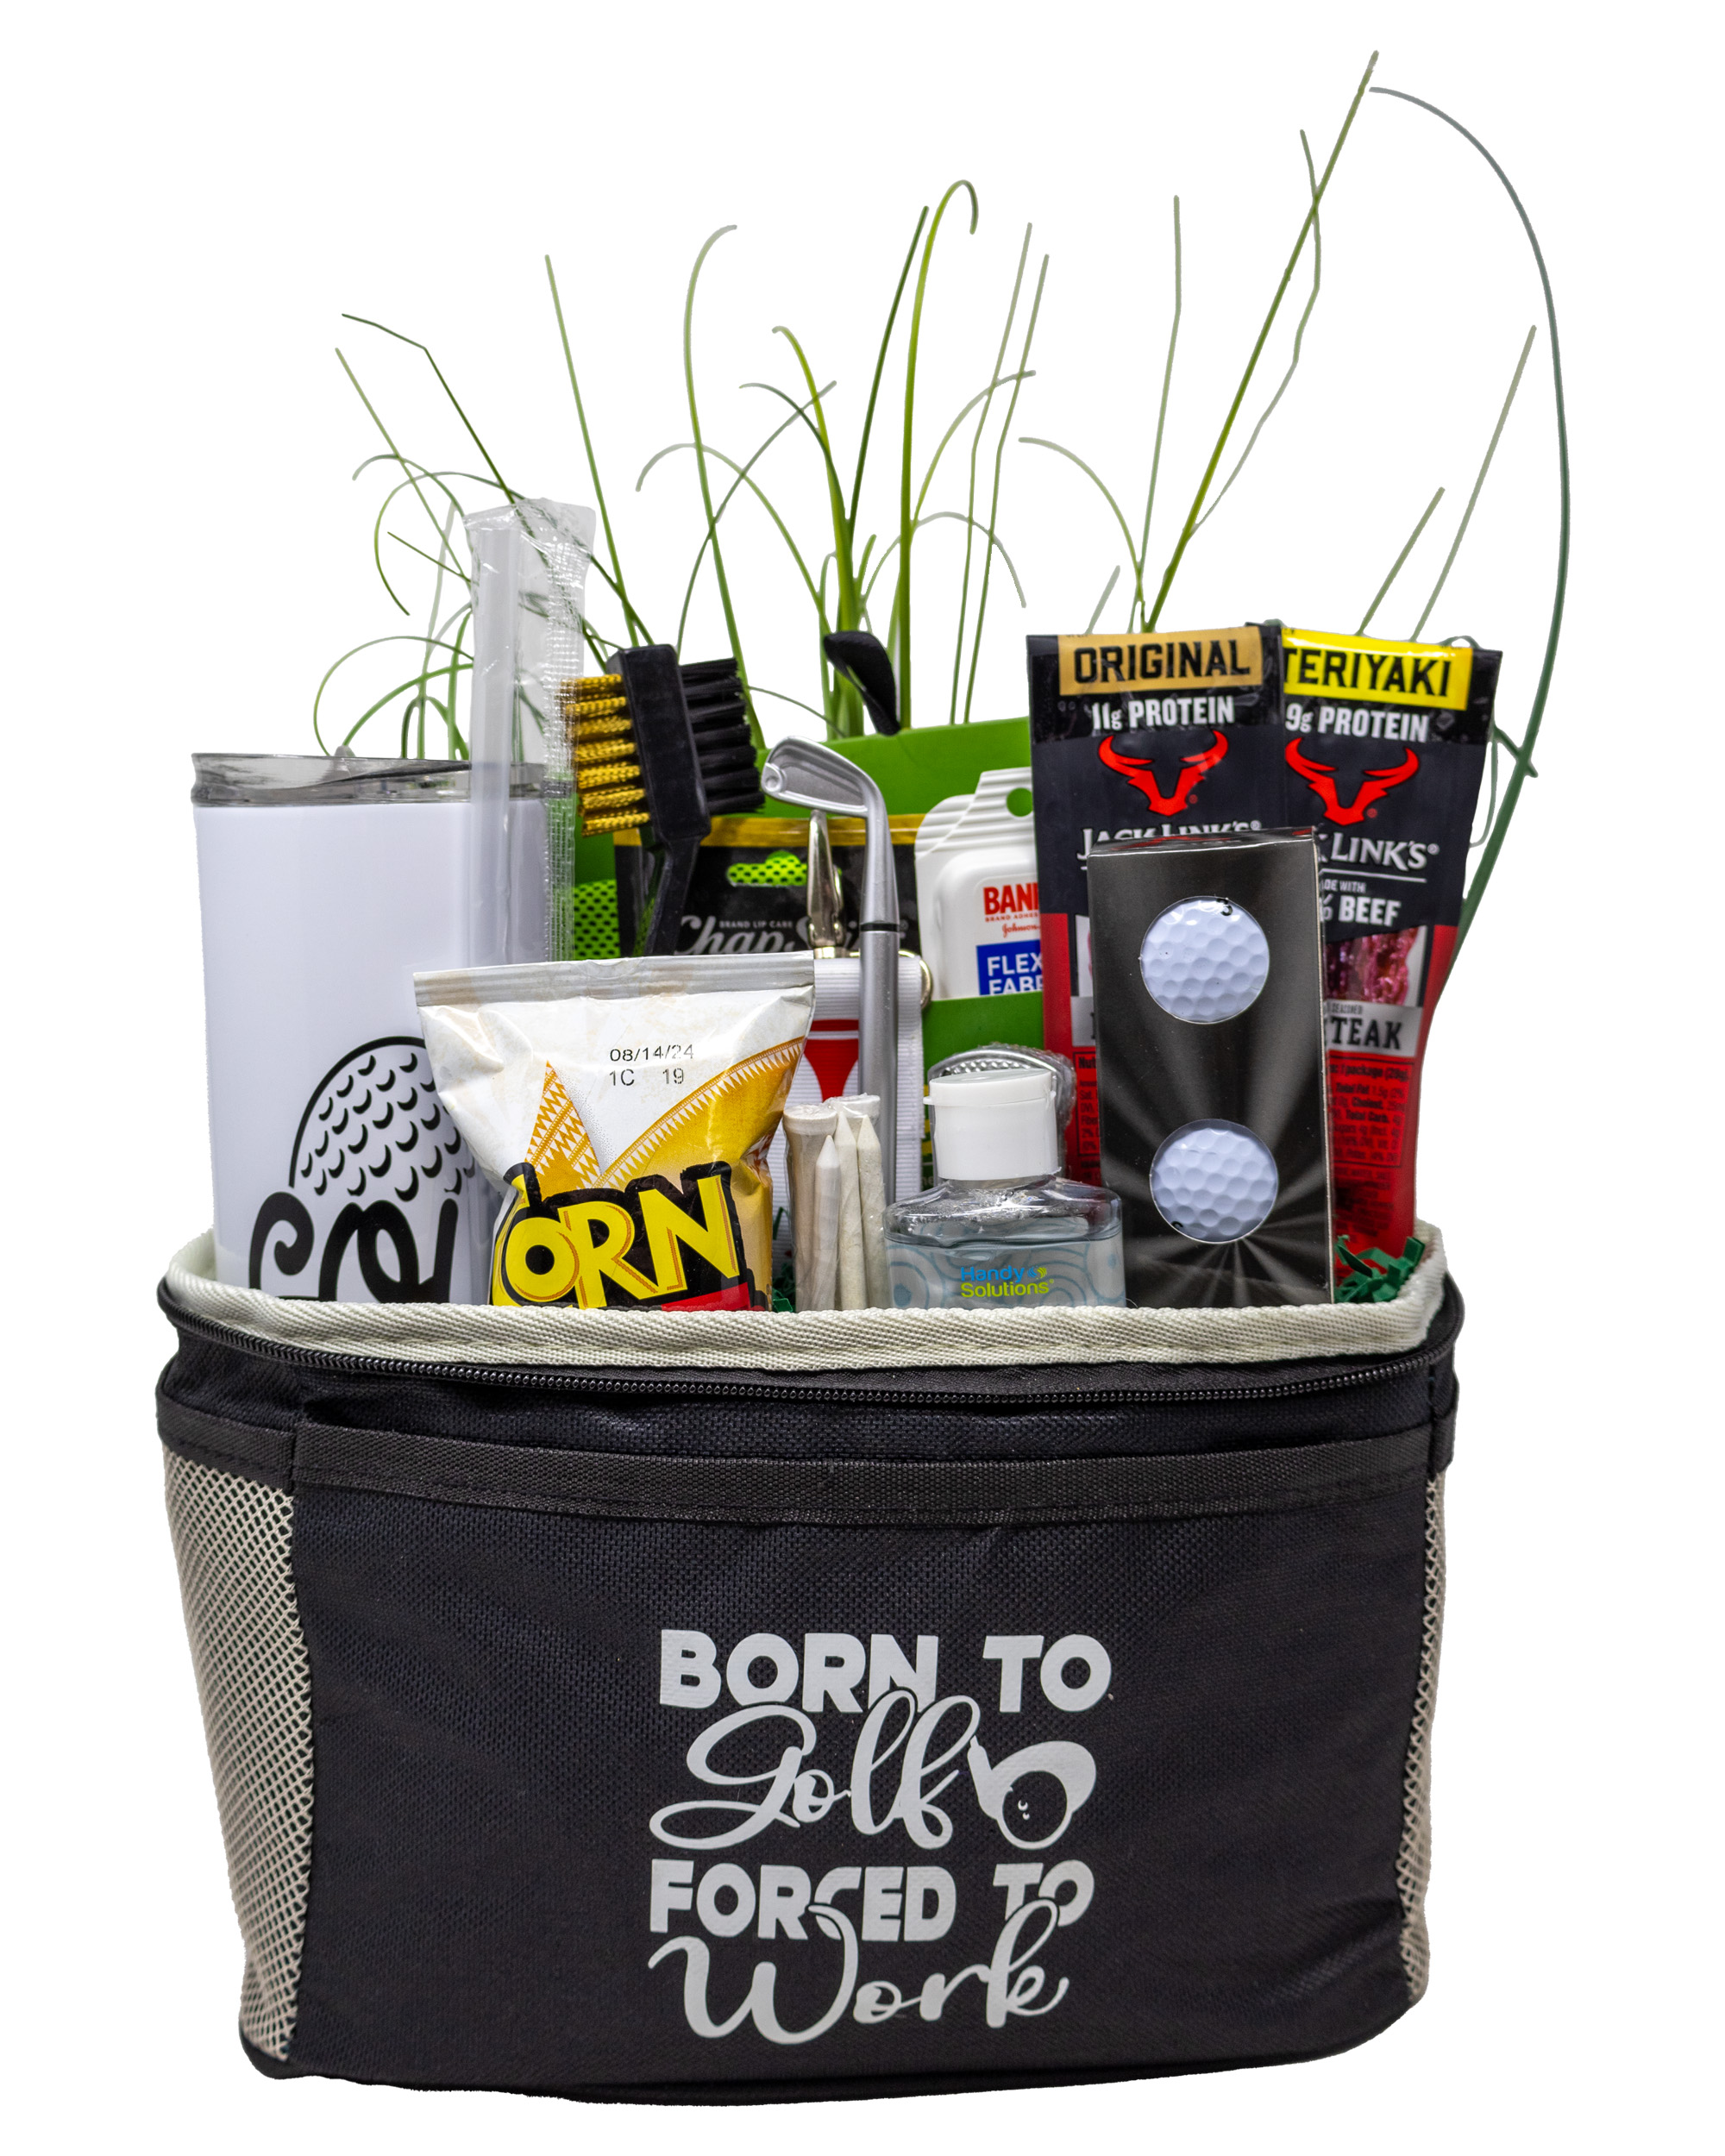 Born to Golf Forced to Work Golfer Gift Basket - image 1 of 7